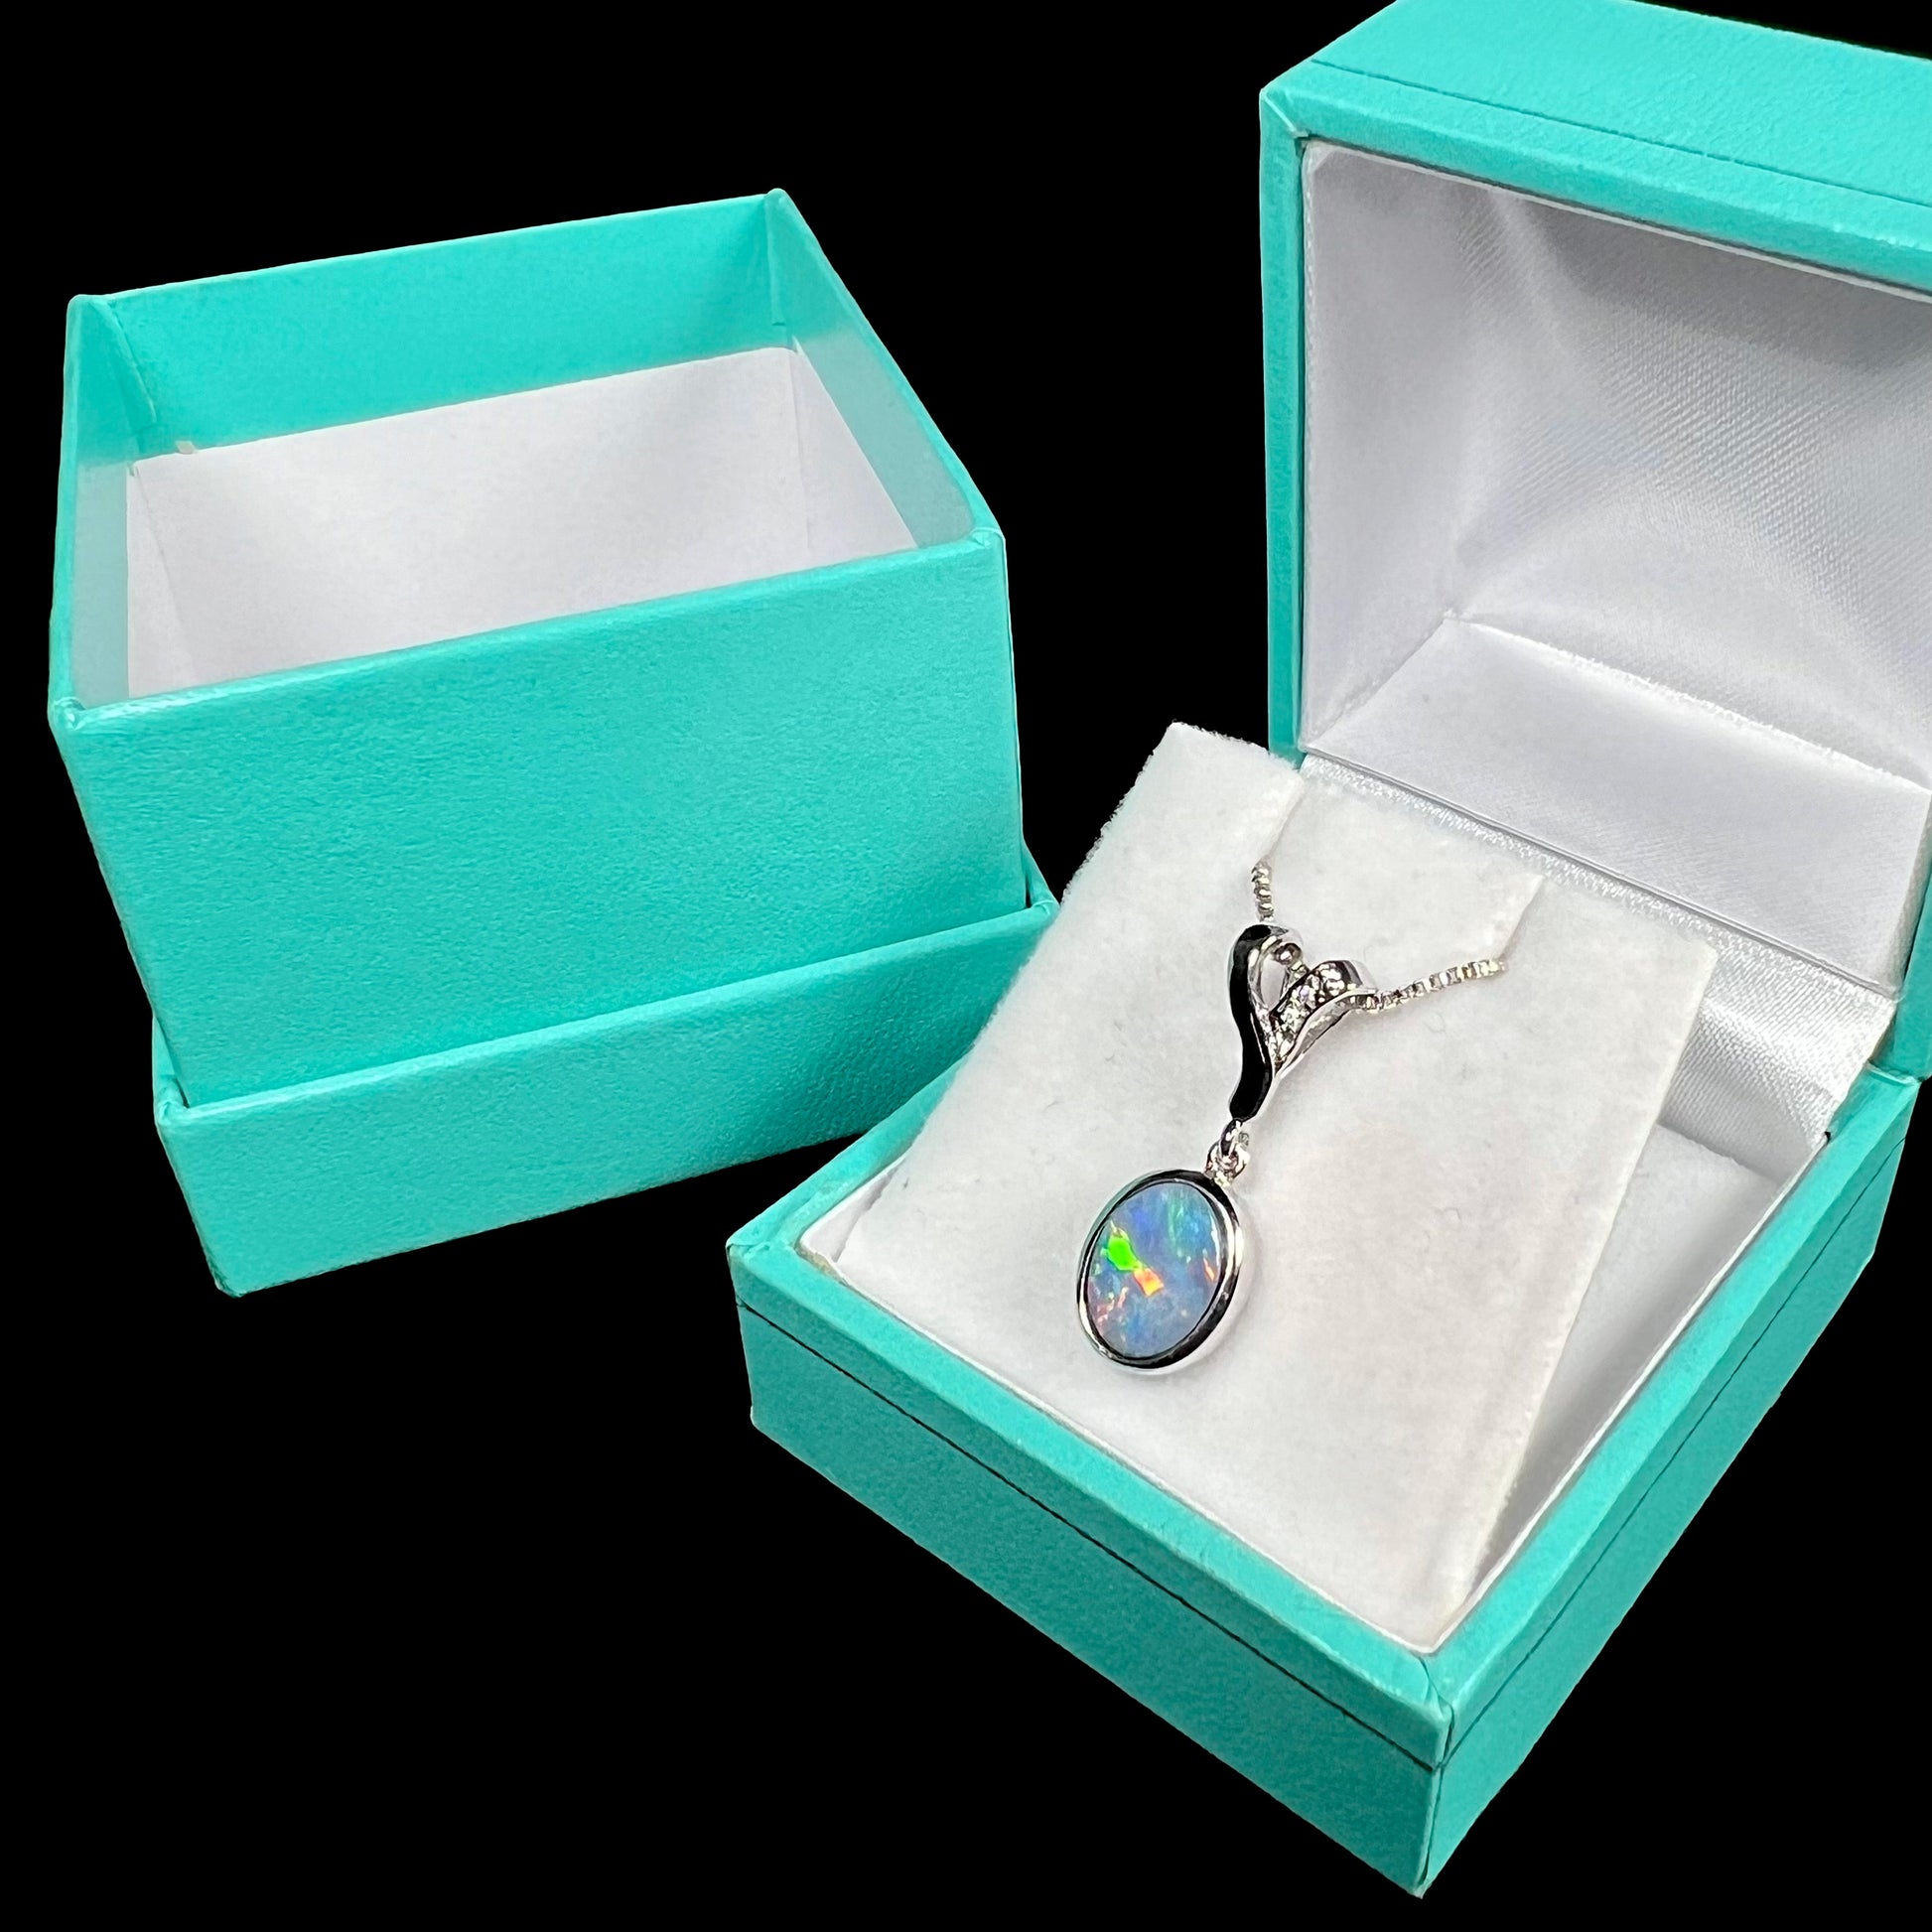 A sterling silver necklace set with a natural black opal doublet and white zircon accent stones.